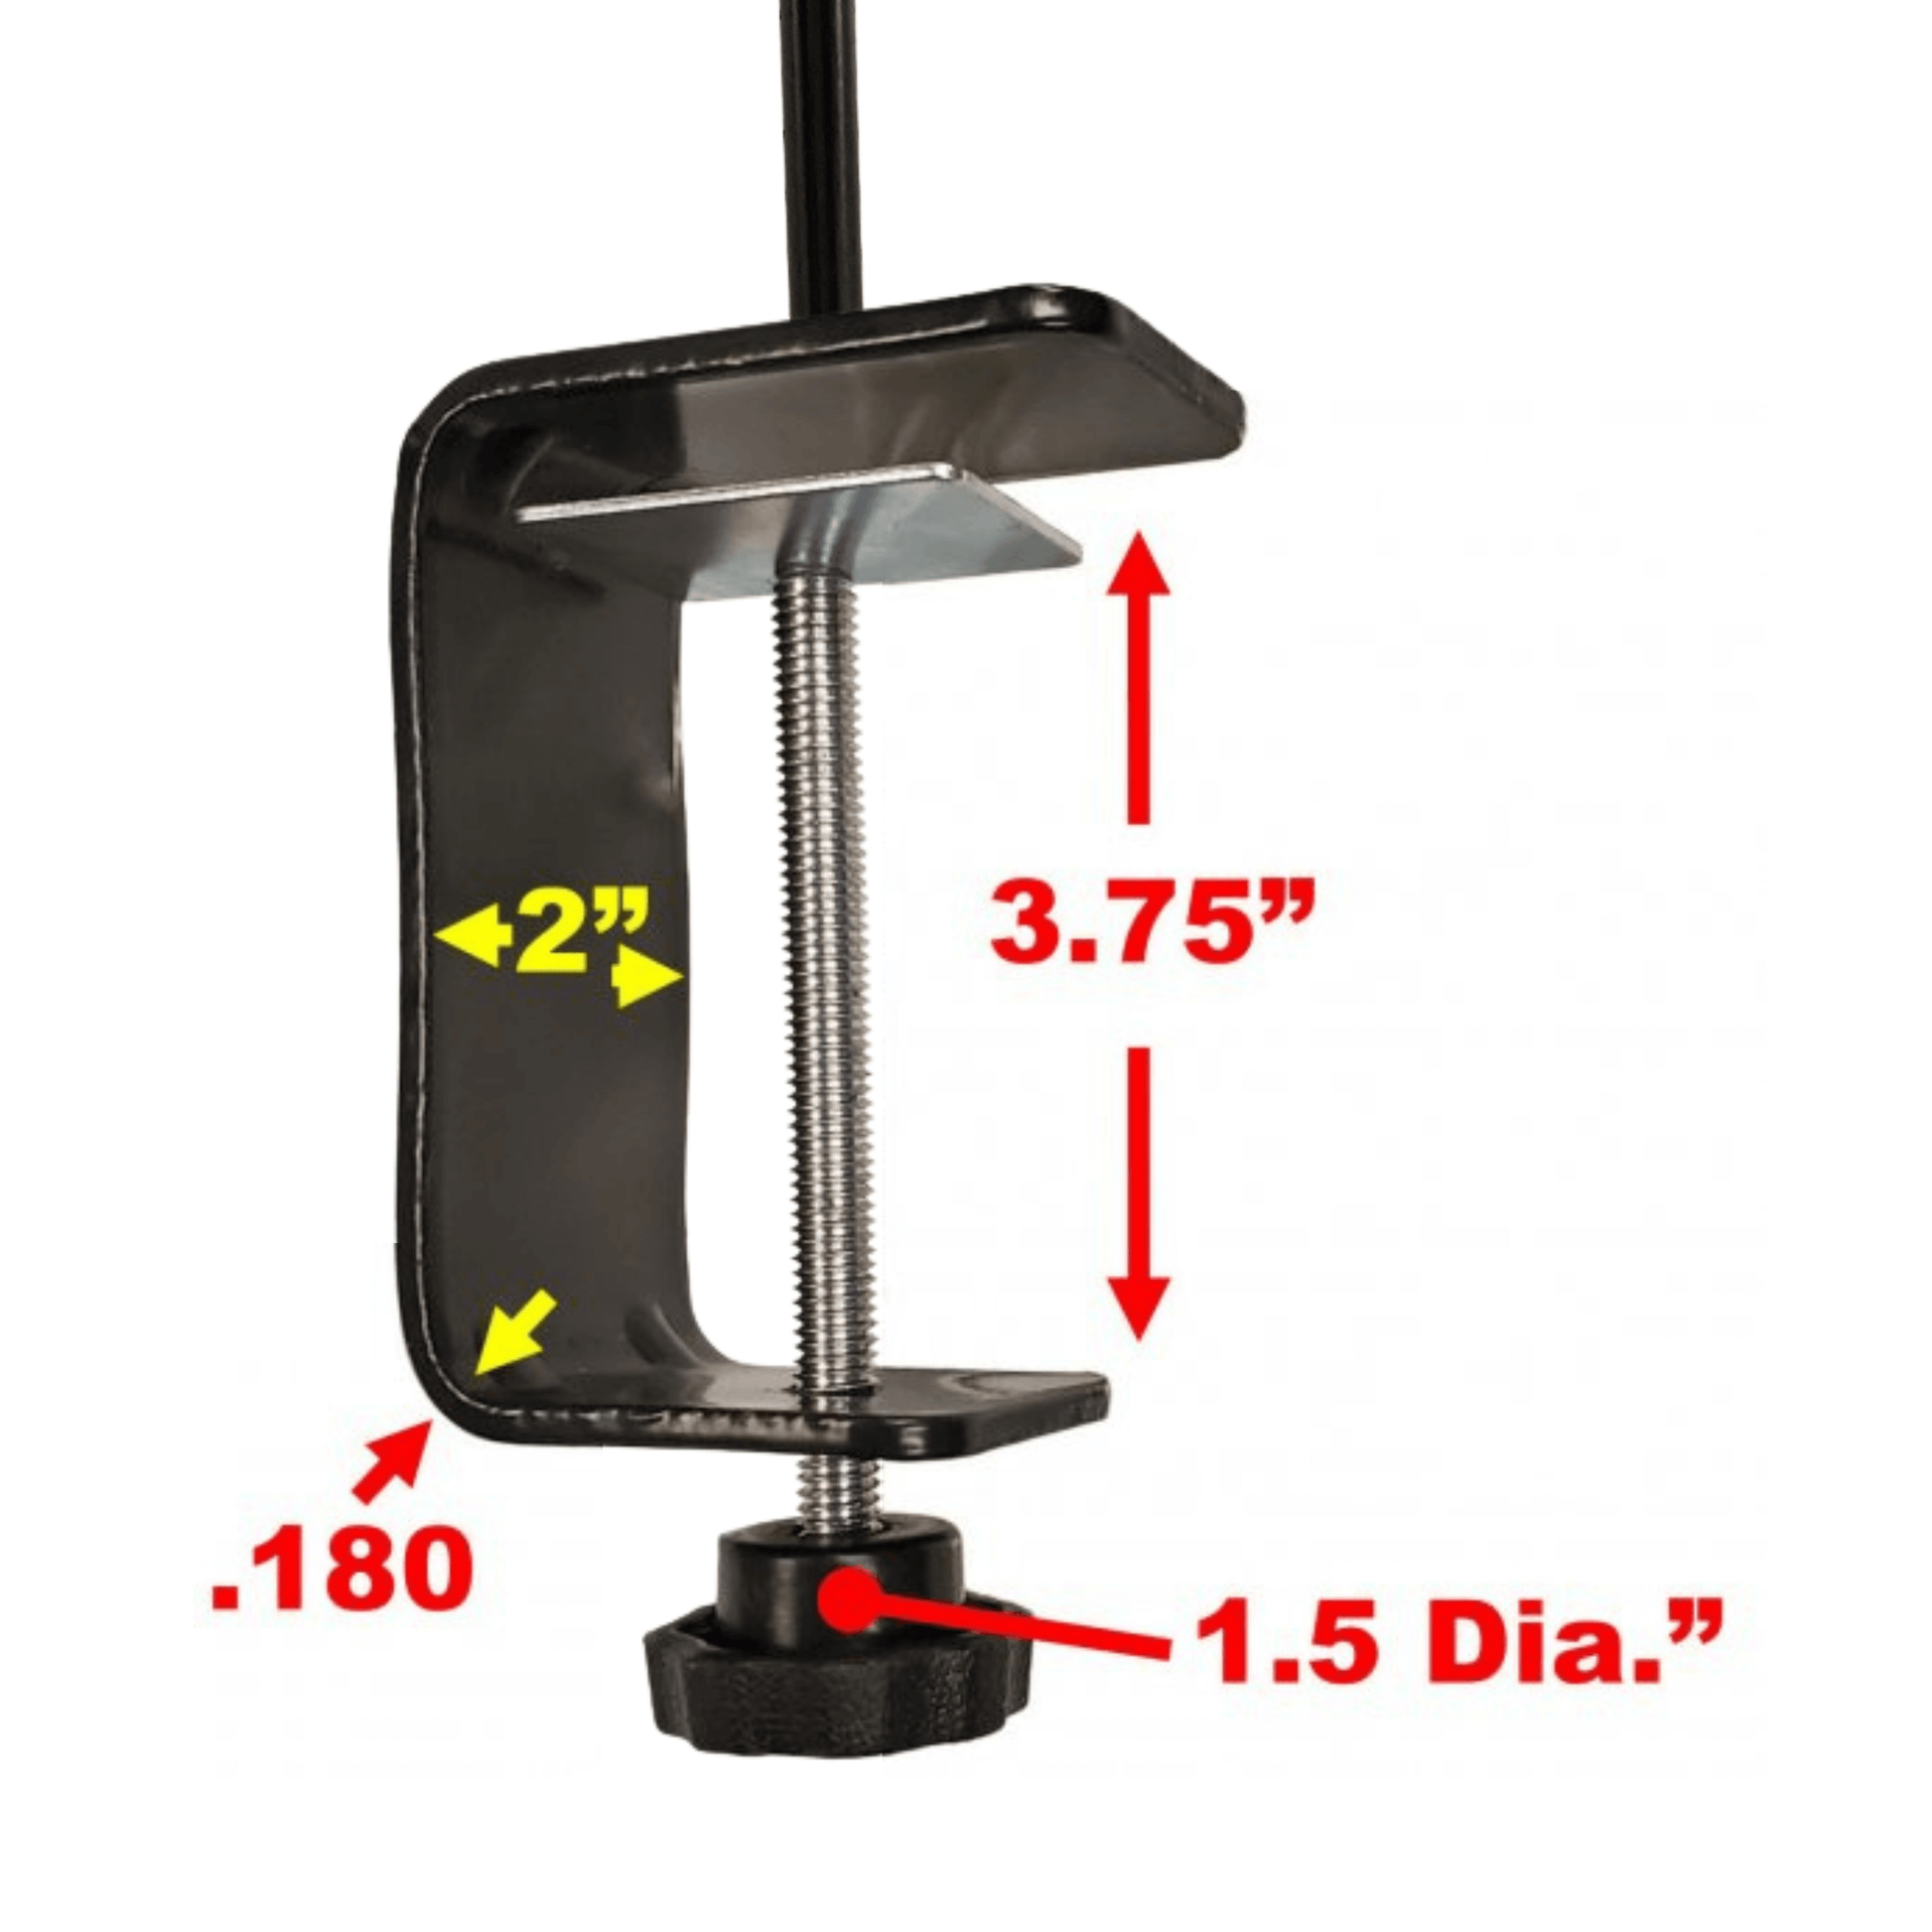 rain gauge clamp dimensions for railings up to 3.75 inches wide